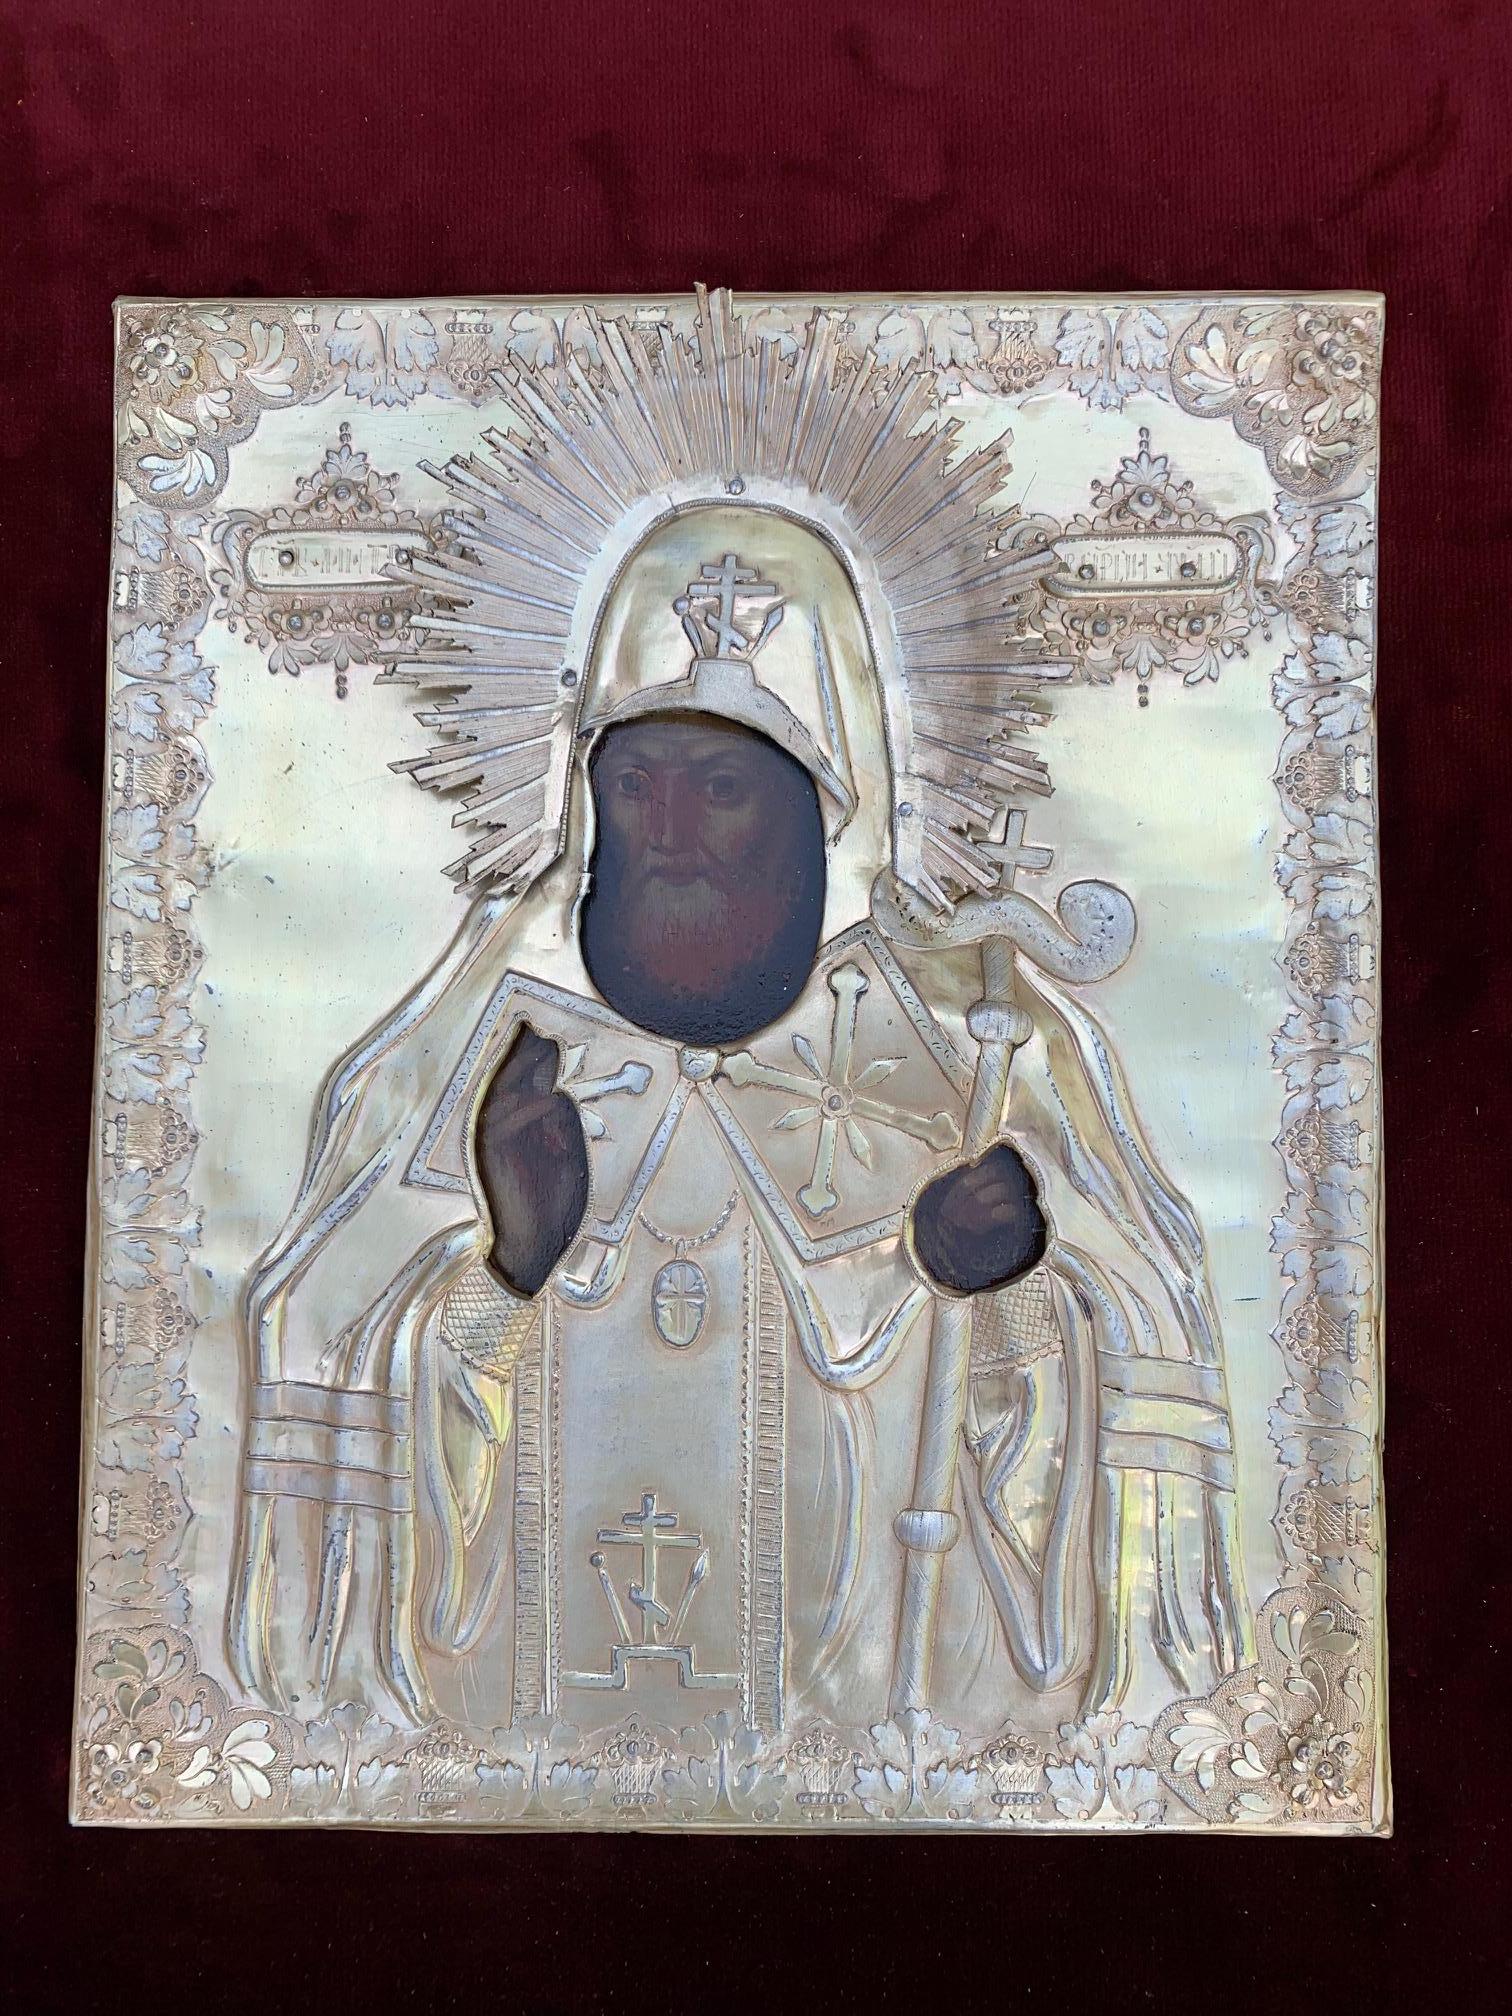 Mid-19th century silver Russian icon on a wood gilt frame, Russia, 1833.